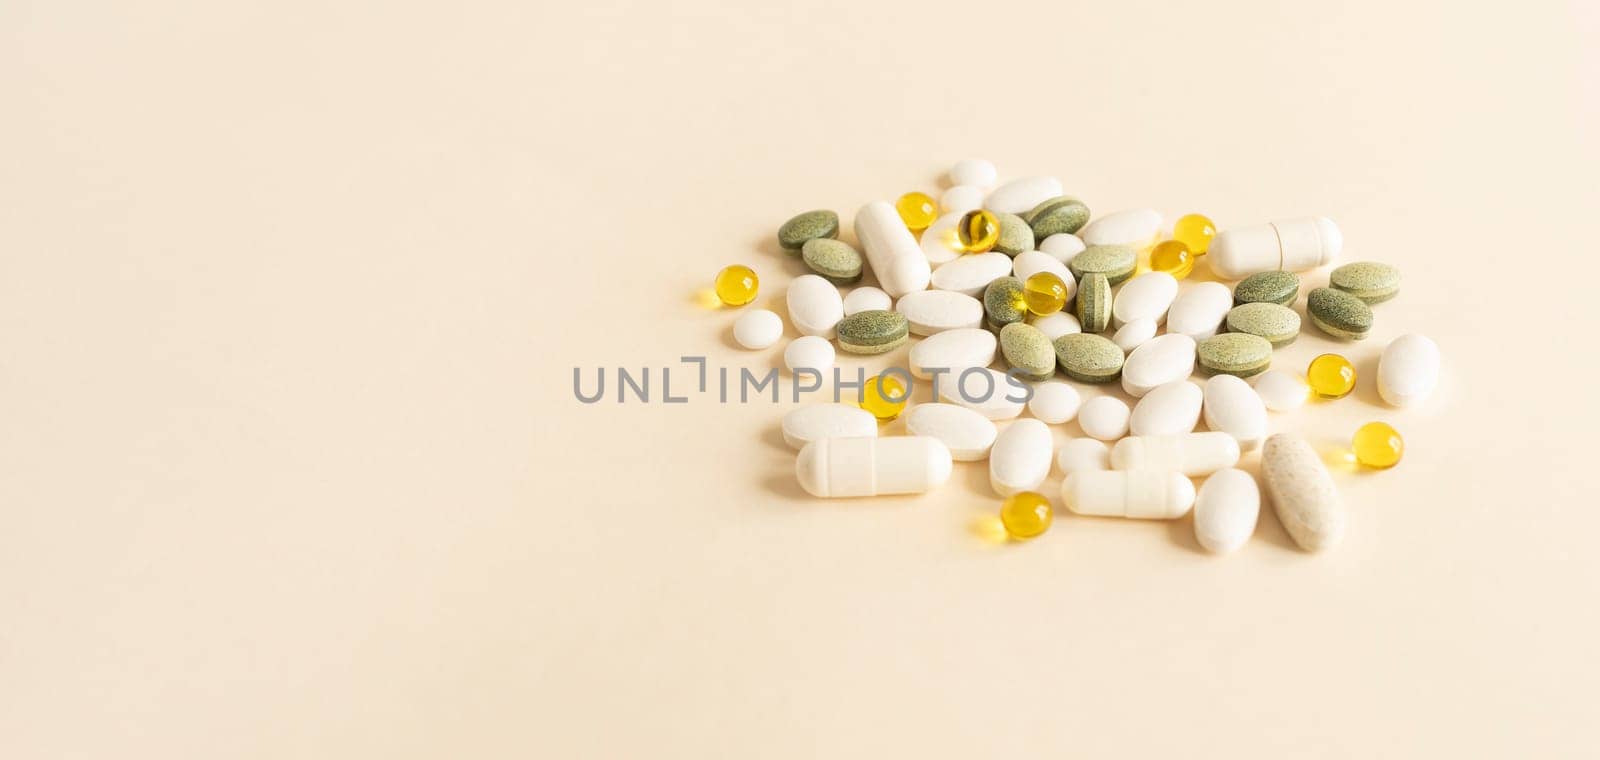 Banner Colorful Pile of Scattered Capsules, Pills, Tablets on Beige Background. Various Medical Supplements, Vitamins or Drug Pharmaceutical Concept. Copy Space For Text. Health Insurance, Horizontal